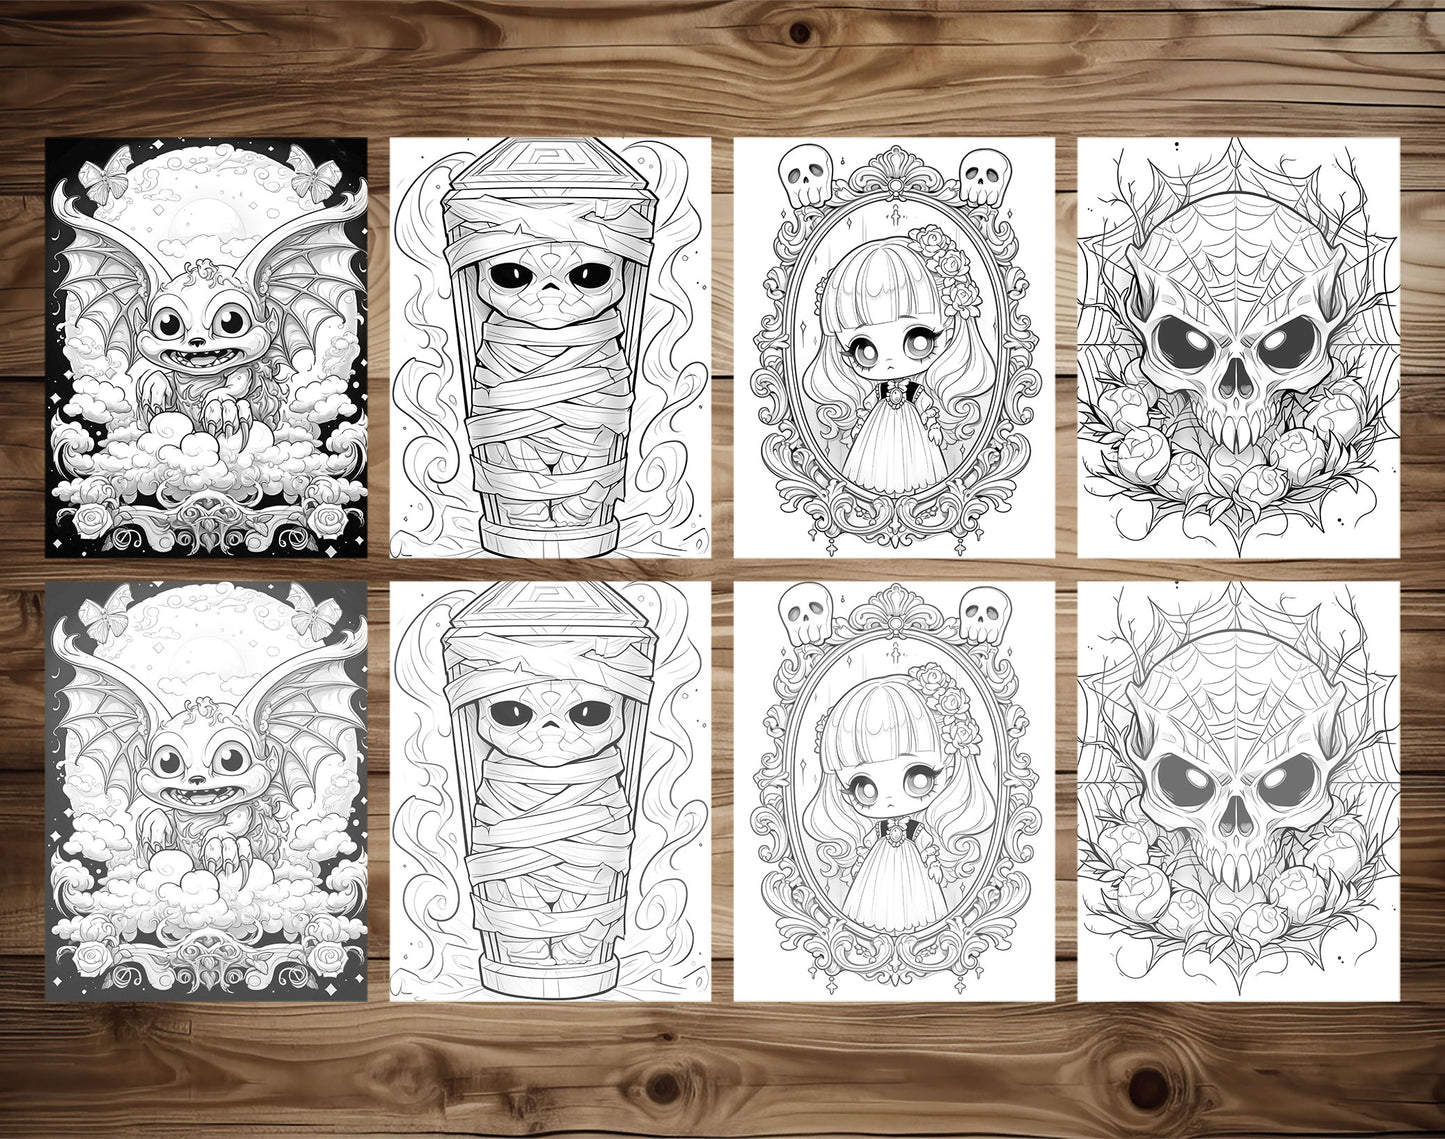 25 Creepy Kawaii Grayscale Coloring Pages - Halloween Coloring - Instant Download - Printable Dark/Light